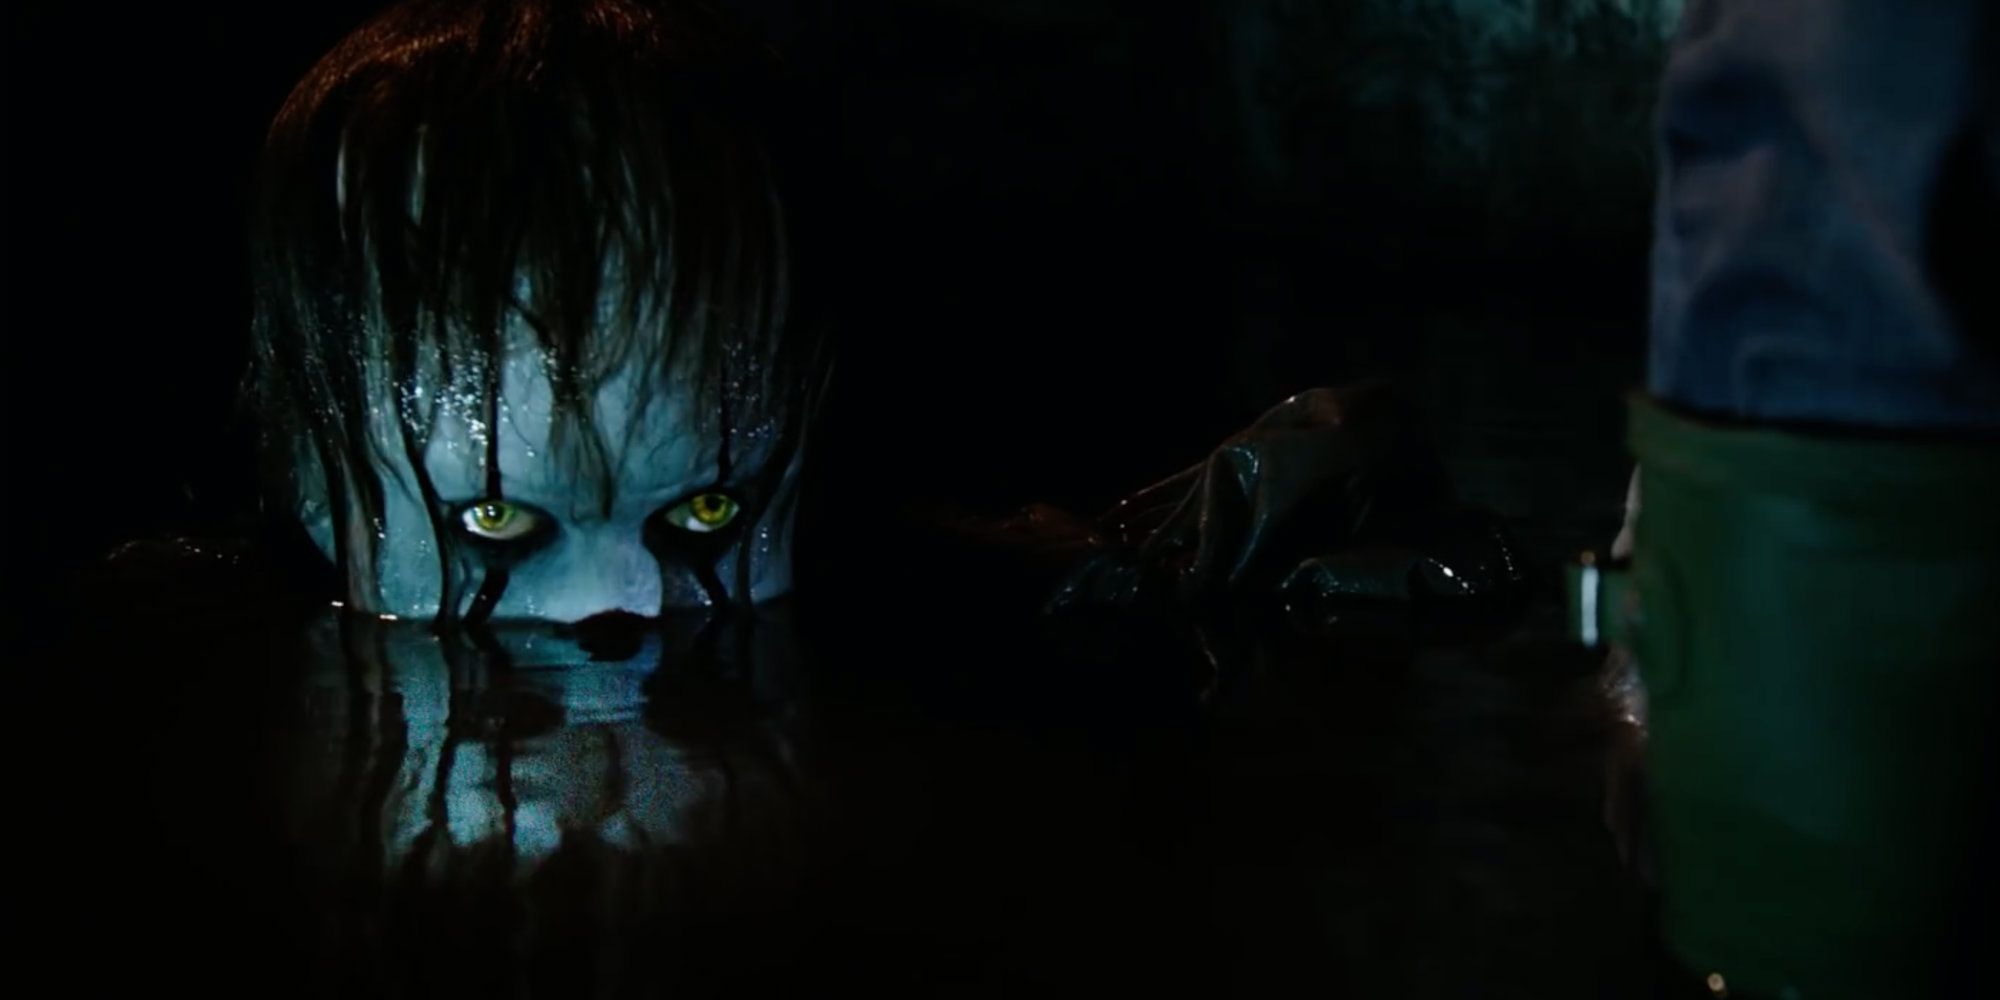 IT Sequel To Explore Pennywise With More Depth